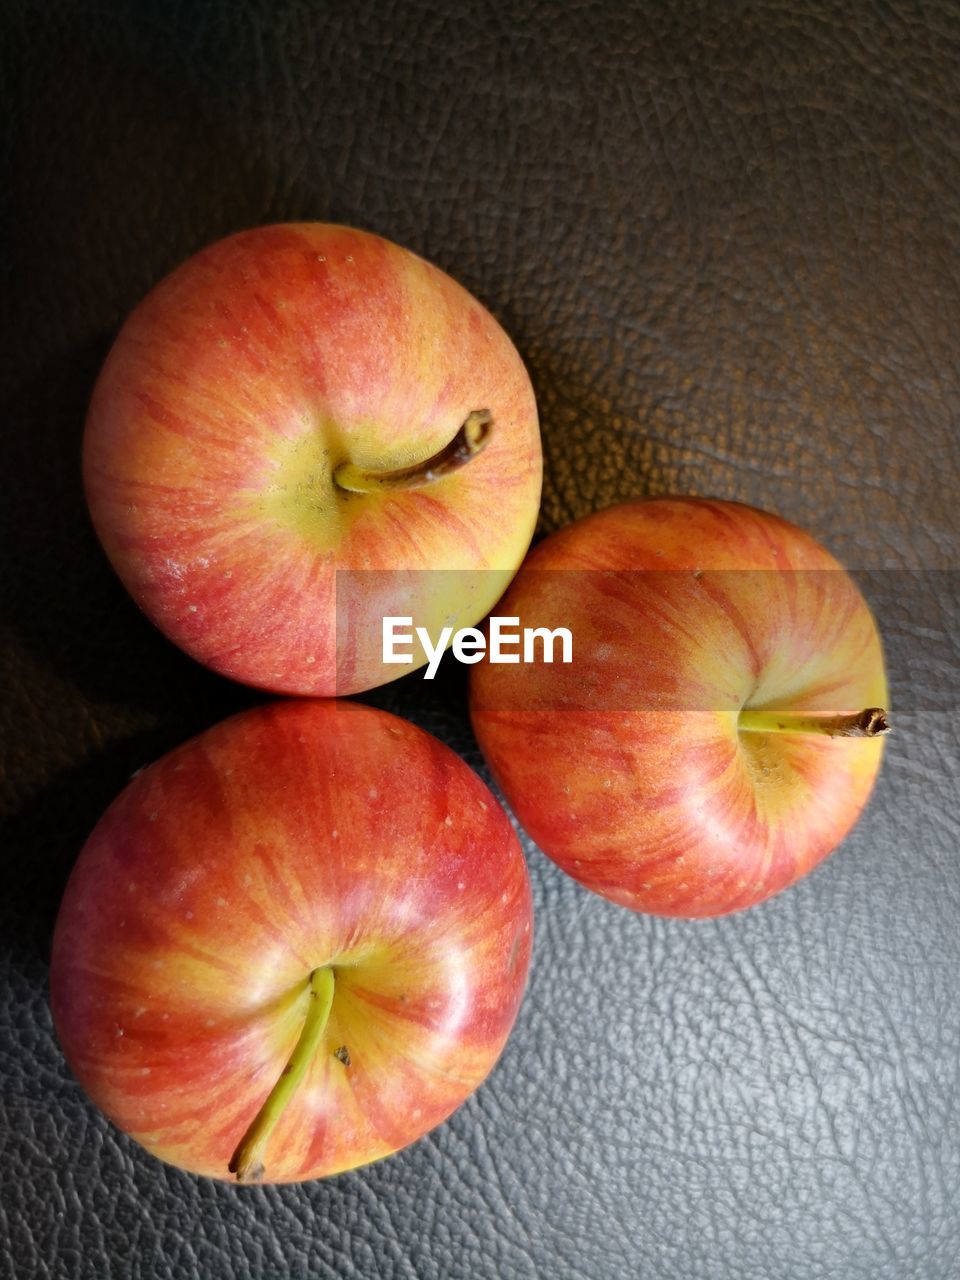 HIGH ANGLE VIEW OF APPLES ON APPLE